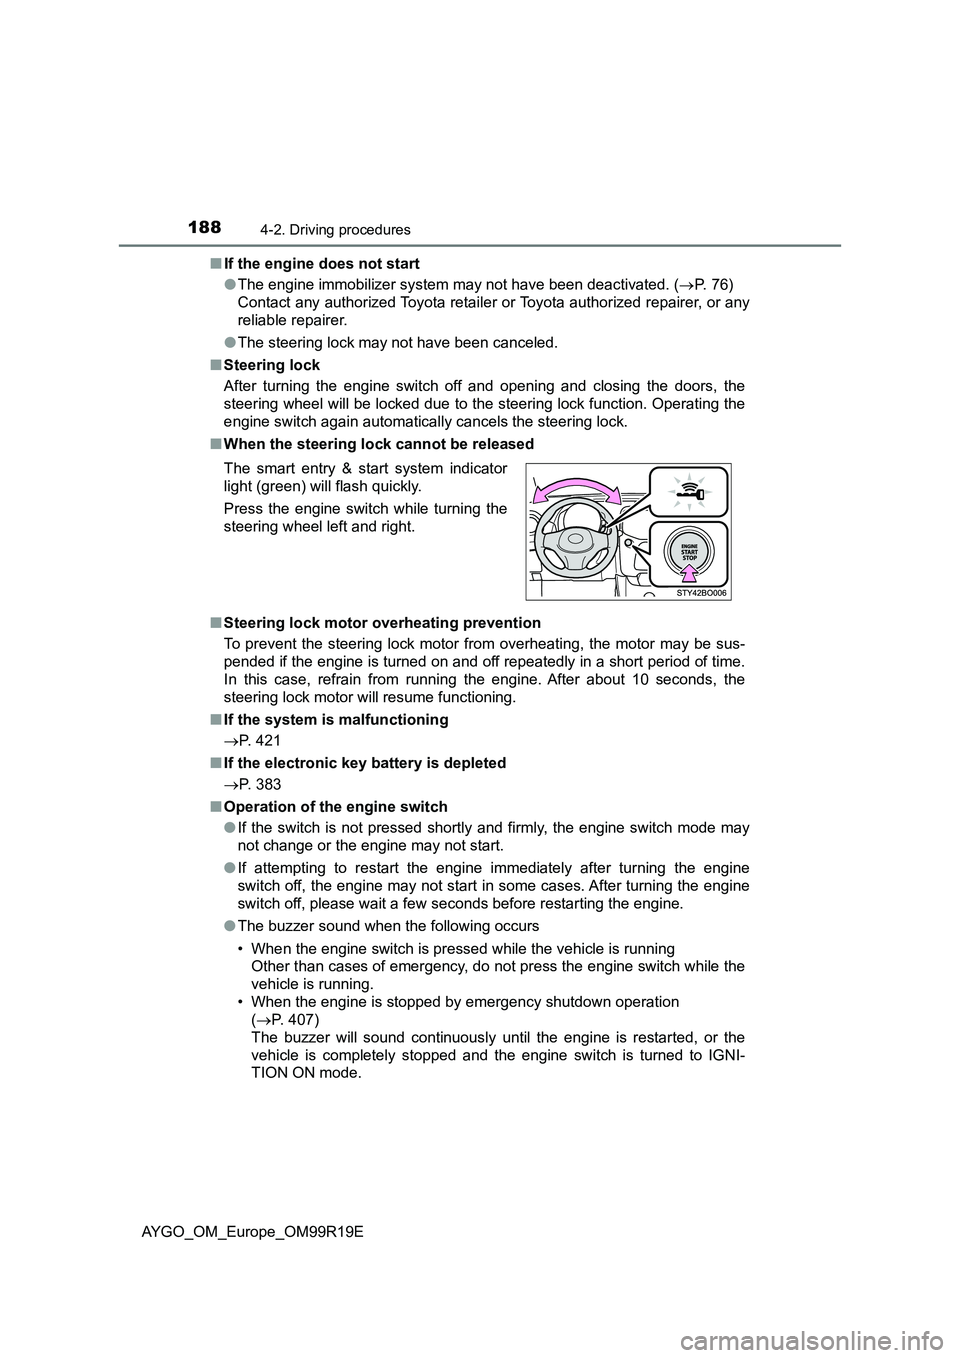 TOYOTA AYGO 2019  Owners Manual (in English) 1884-2. Driving procedures
AYGO_OM_Europe_OM99R19E 
■ If the engine does not start 
● The engine immobilizer system may not have been deactivated. (P.  7 6 )   
Contact any authorized Toyota re